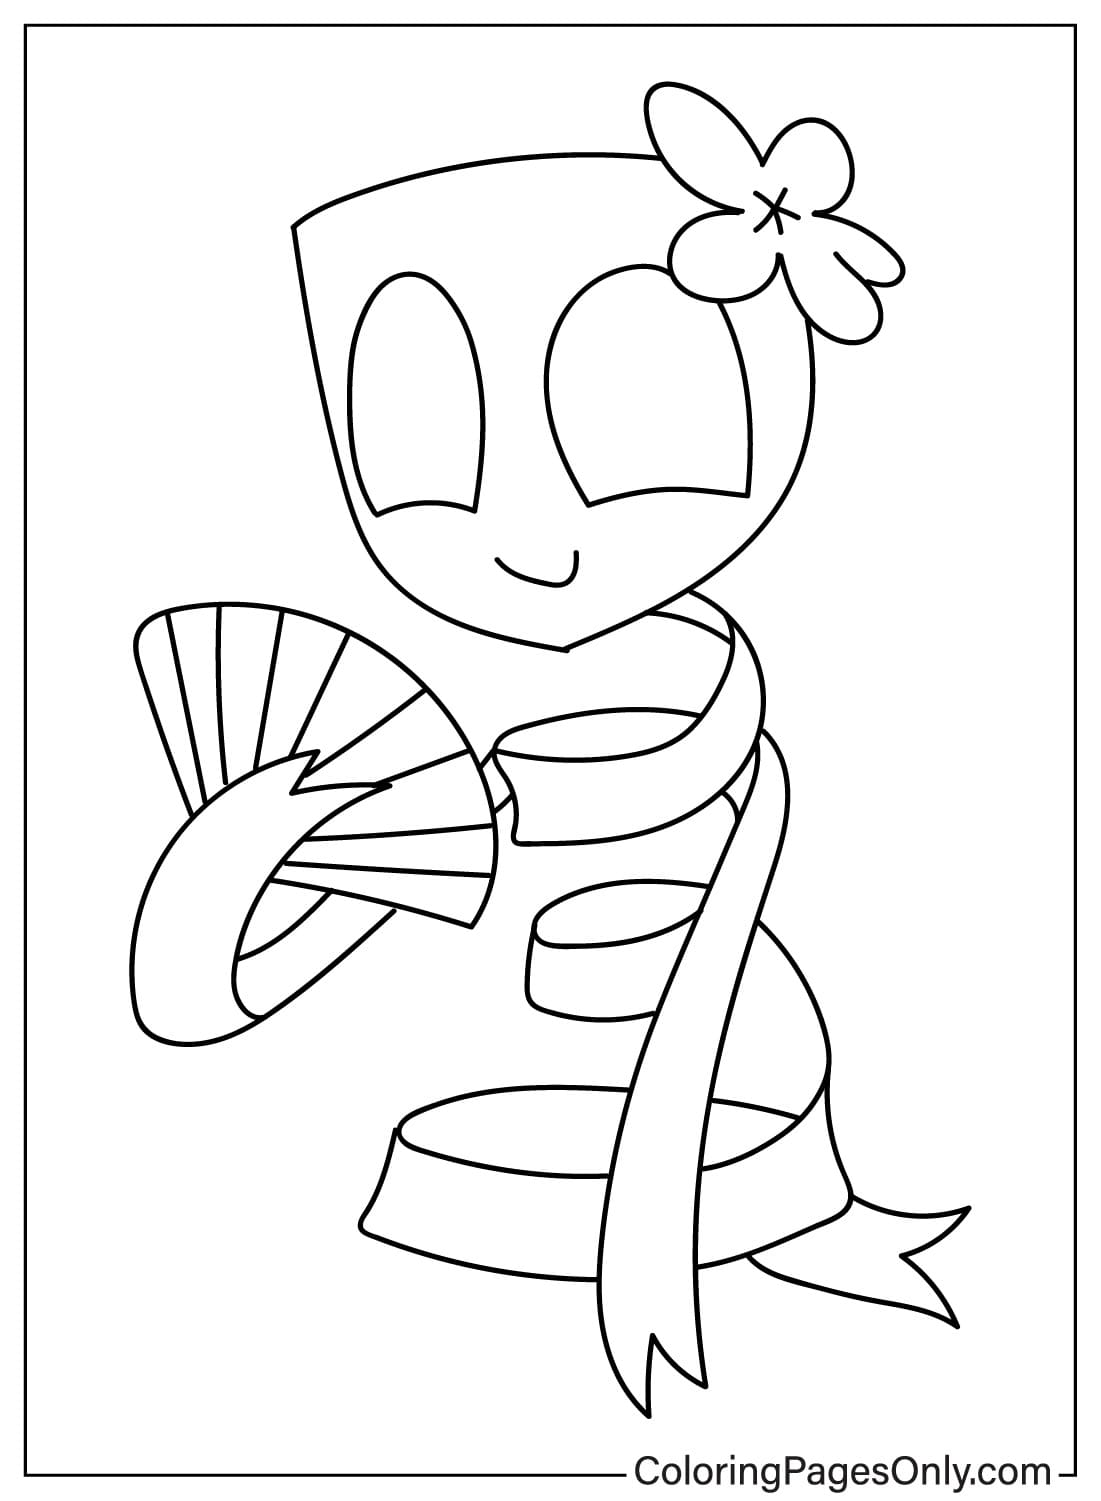 Cute Gangle Coloring Page from Gangle